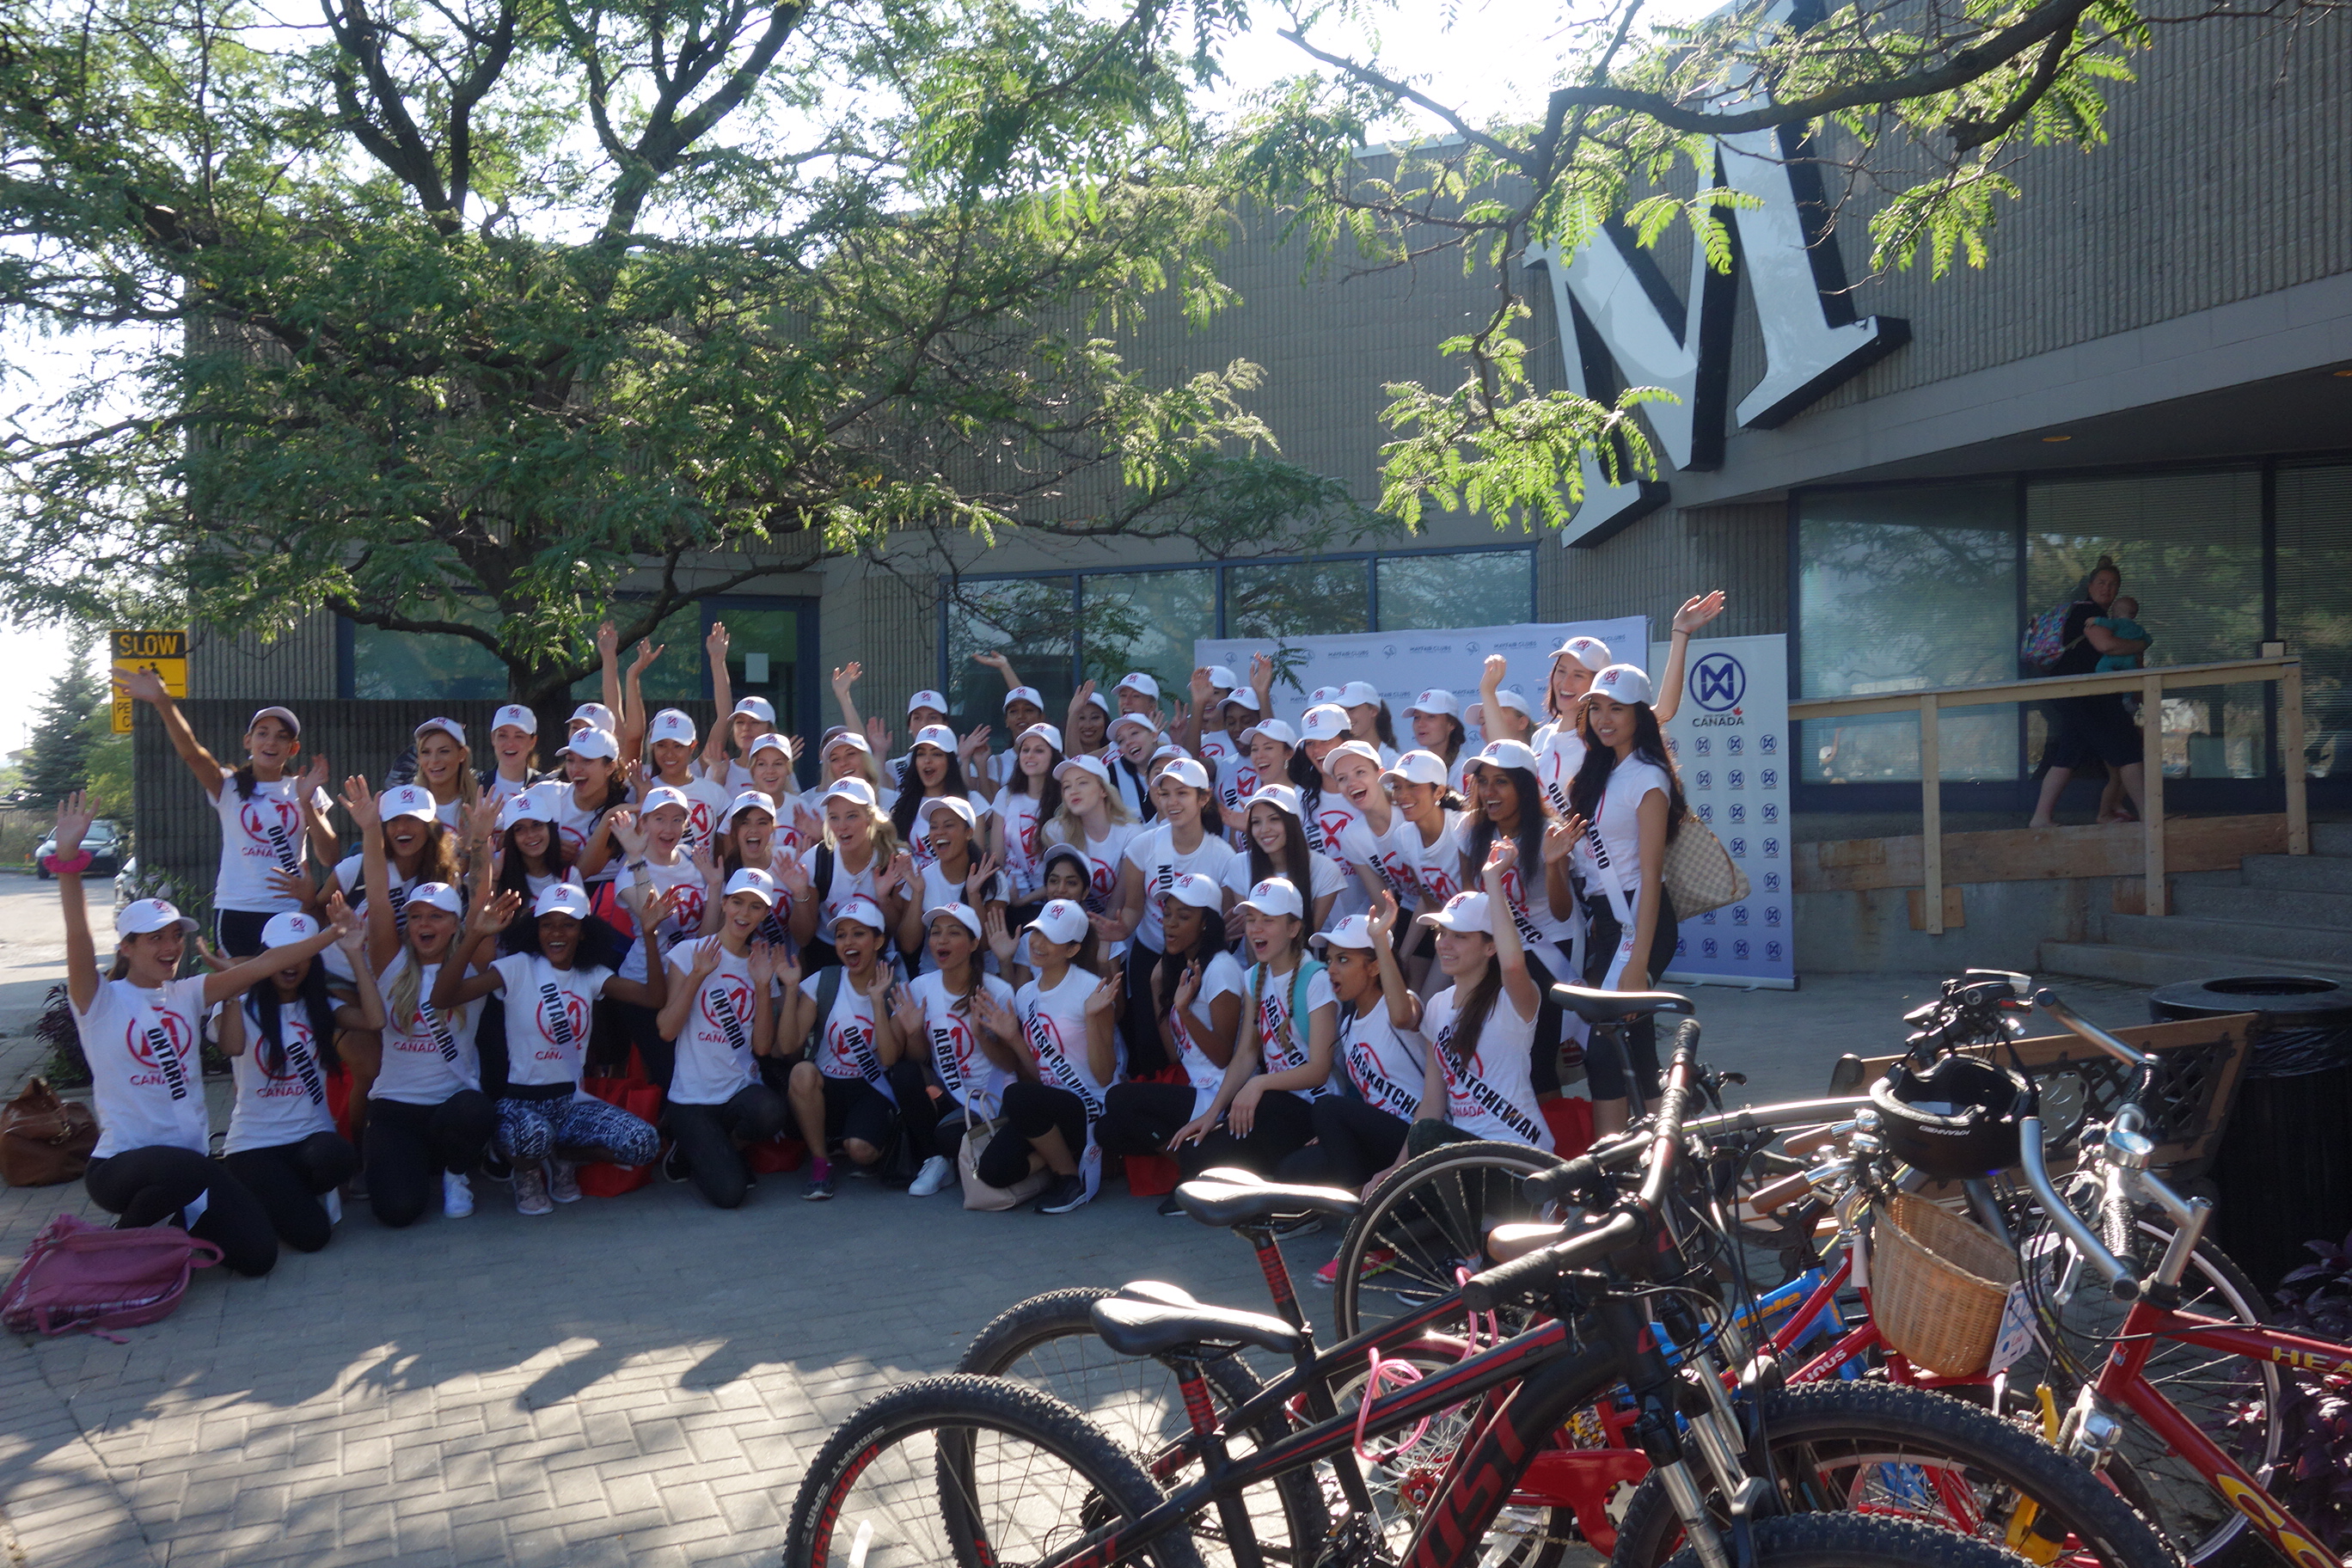 Mayfair Clubs Hosts Fitness Day in Toronto - Miss World 